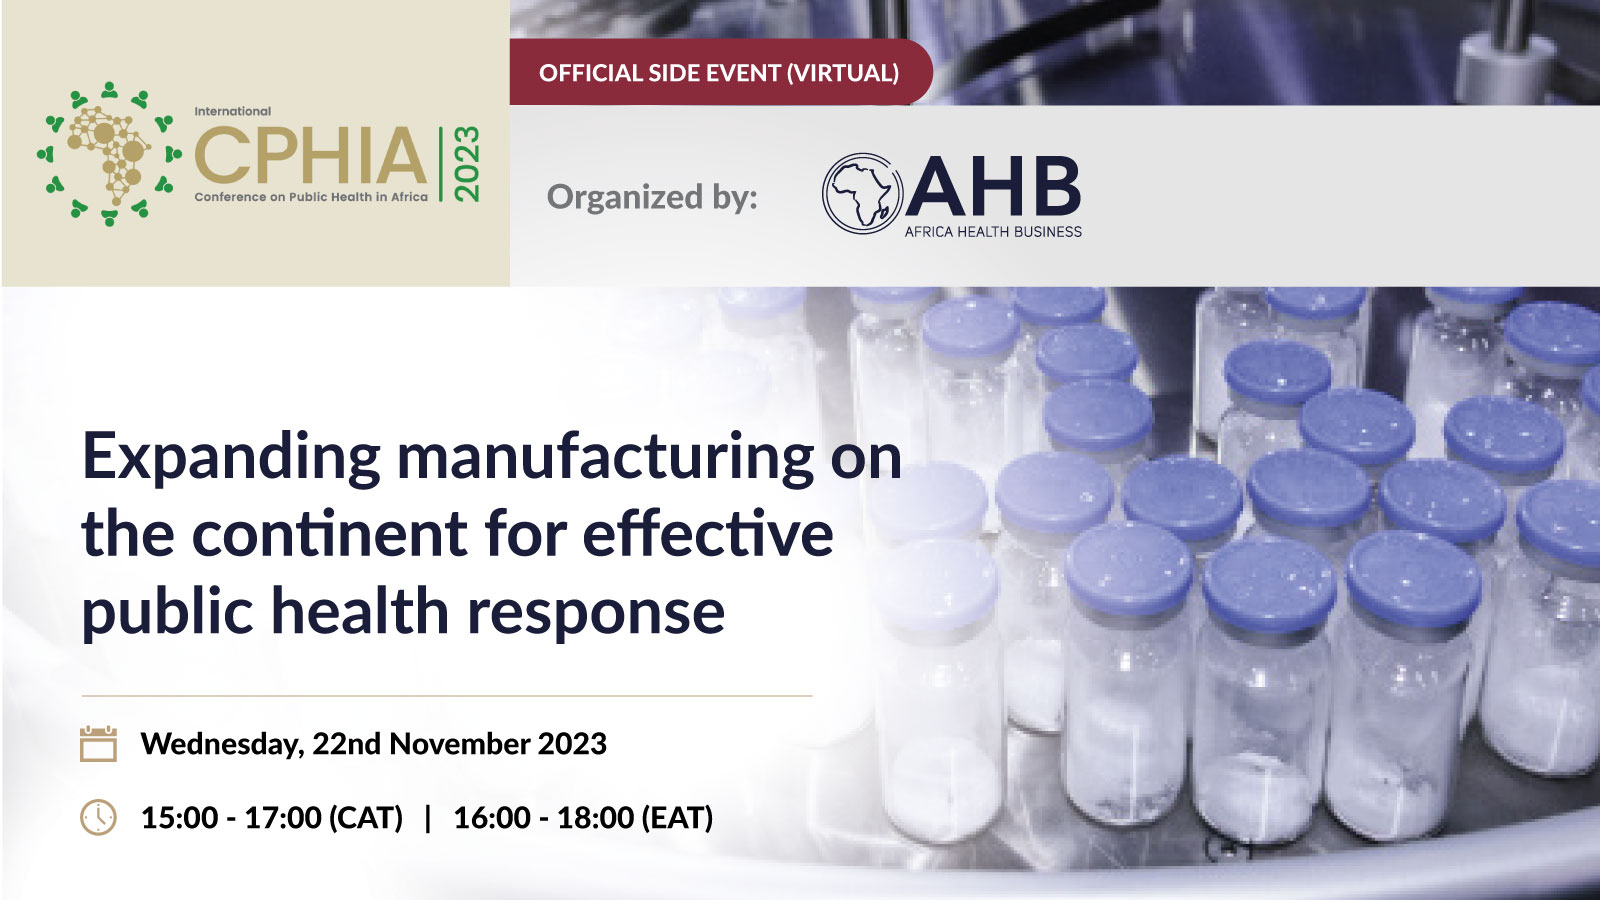 Expanding manufacturing on the continent for effective public health response